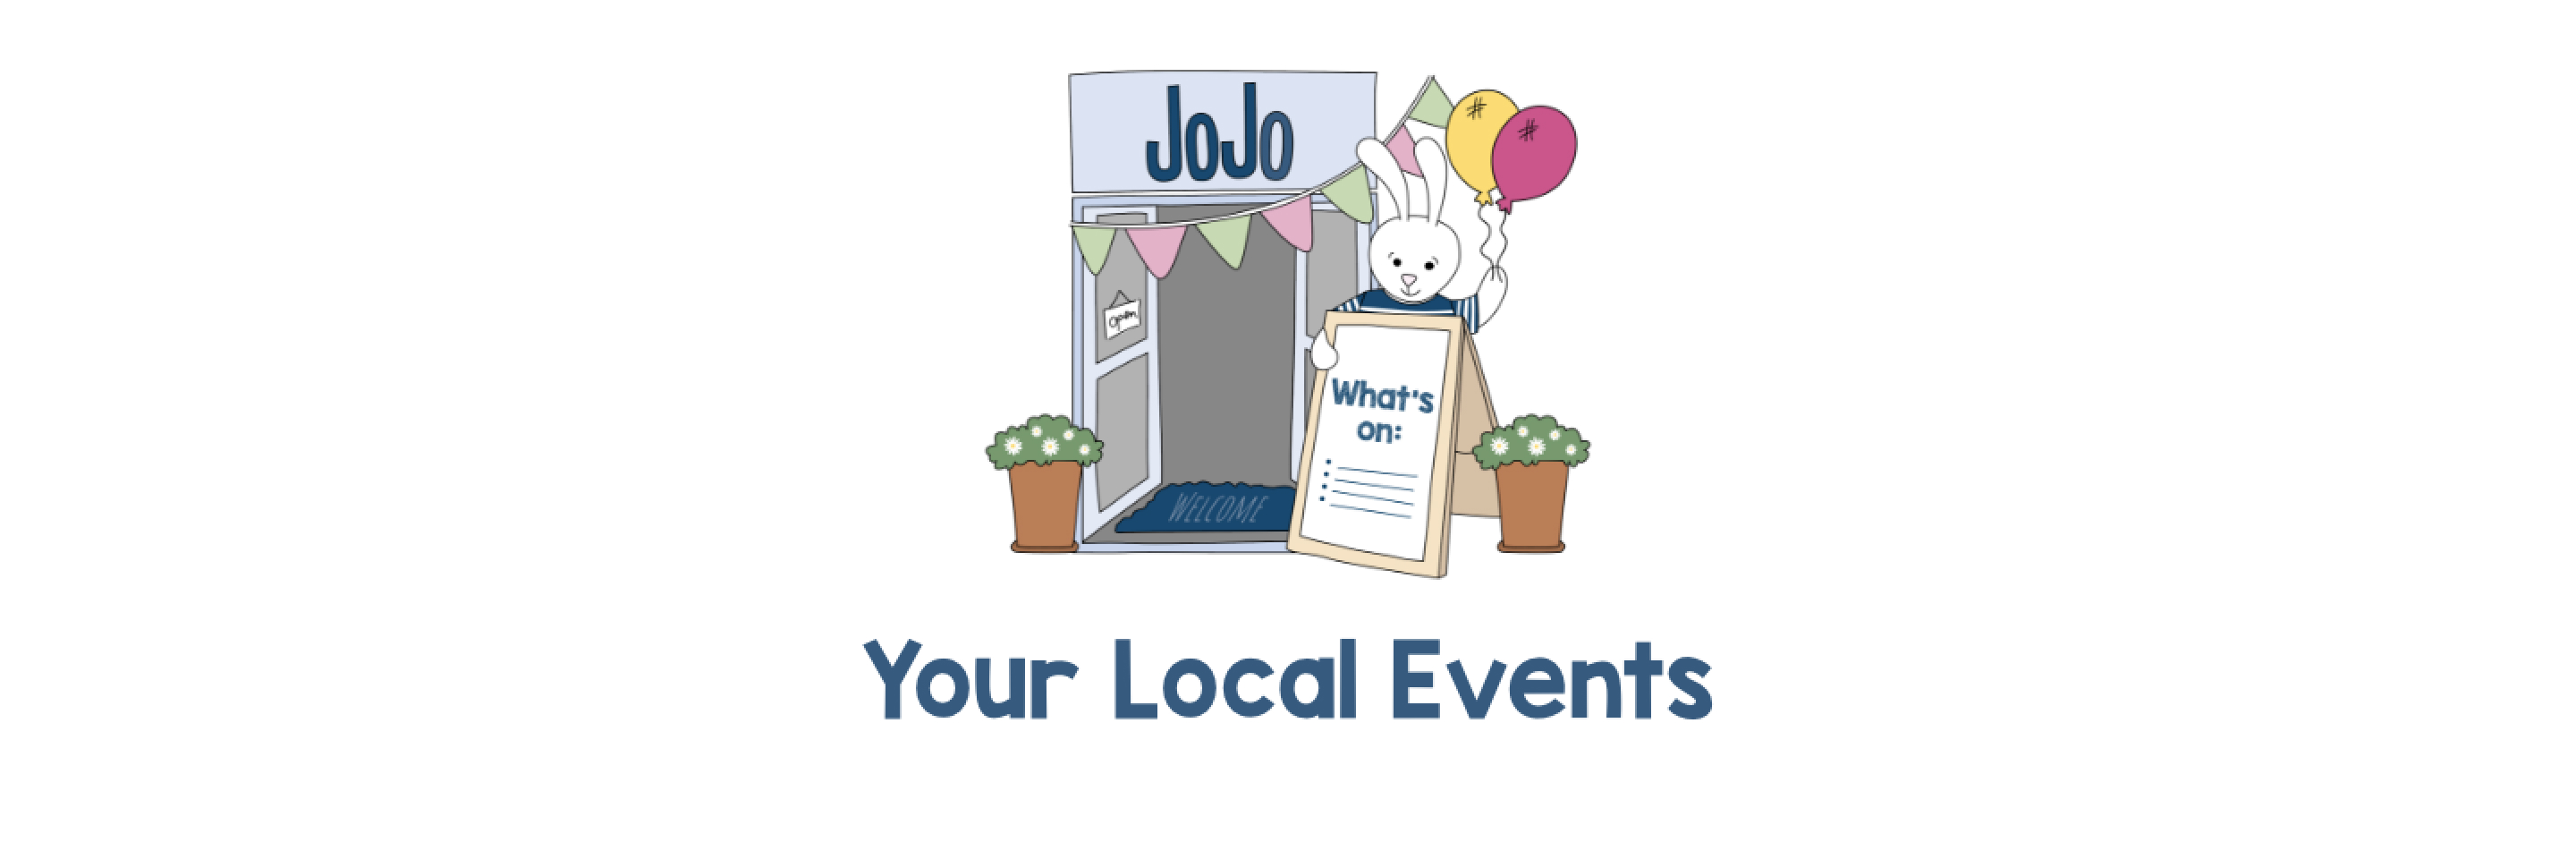 LocalEvents_D